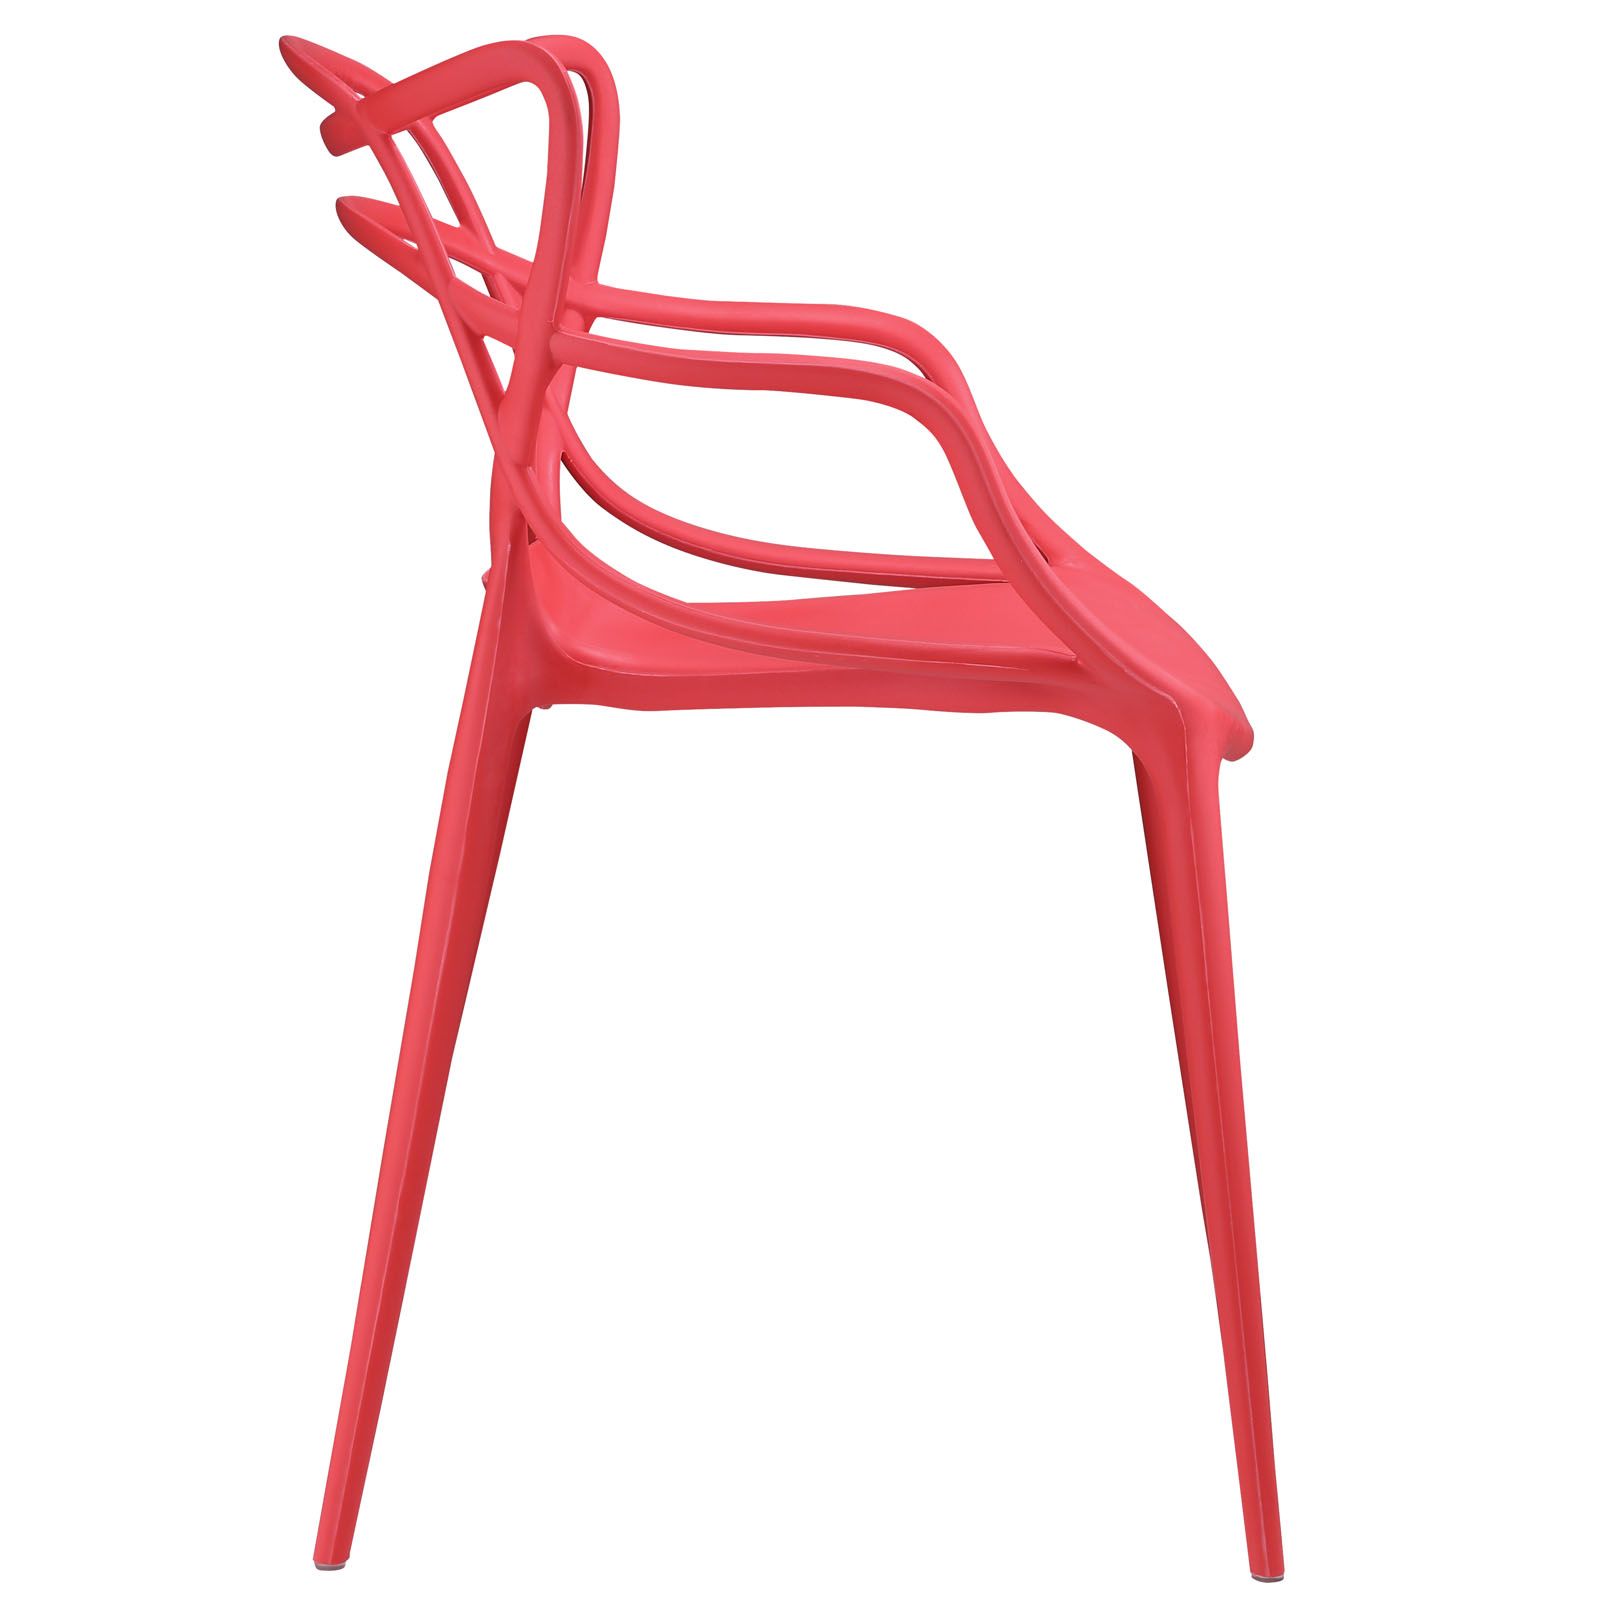 Modern Contemporary Urban Design Outdoor Kitchen Room Dining Chair Set ( Set of Two), Red, Plastic - image 3 of 4